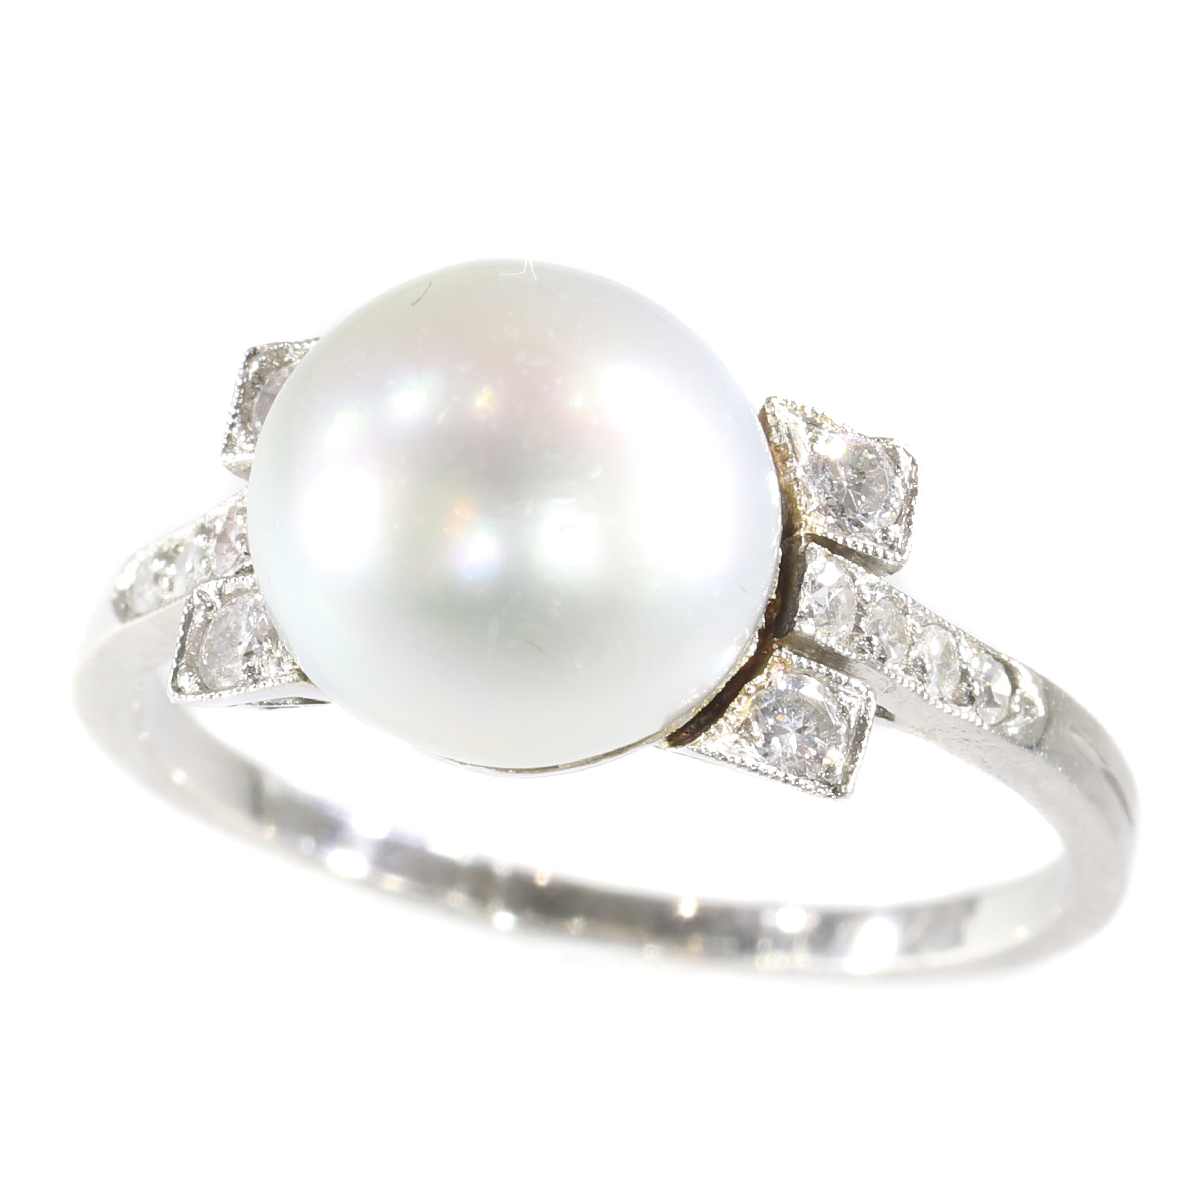 Art Deco ring with large pearl and diamonds